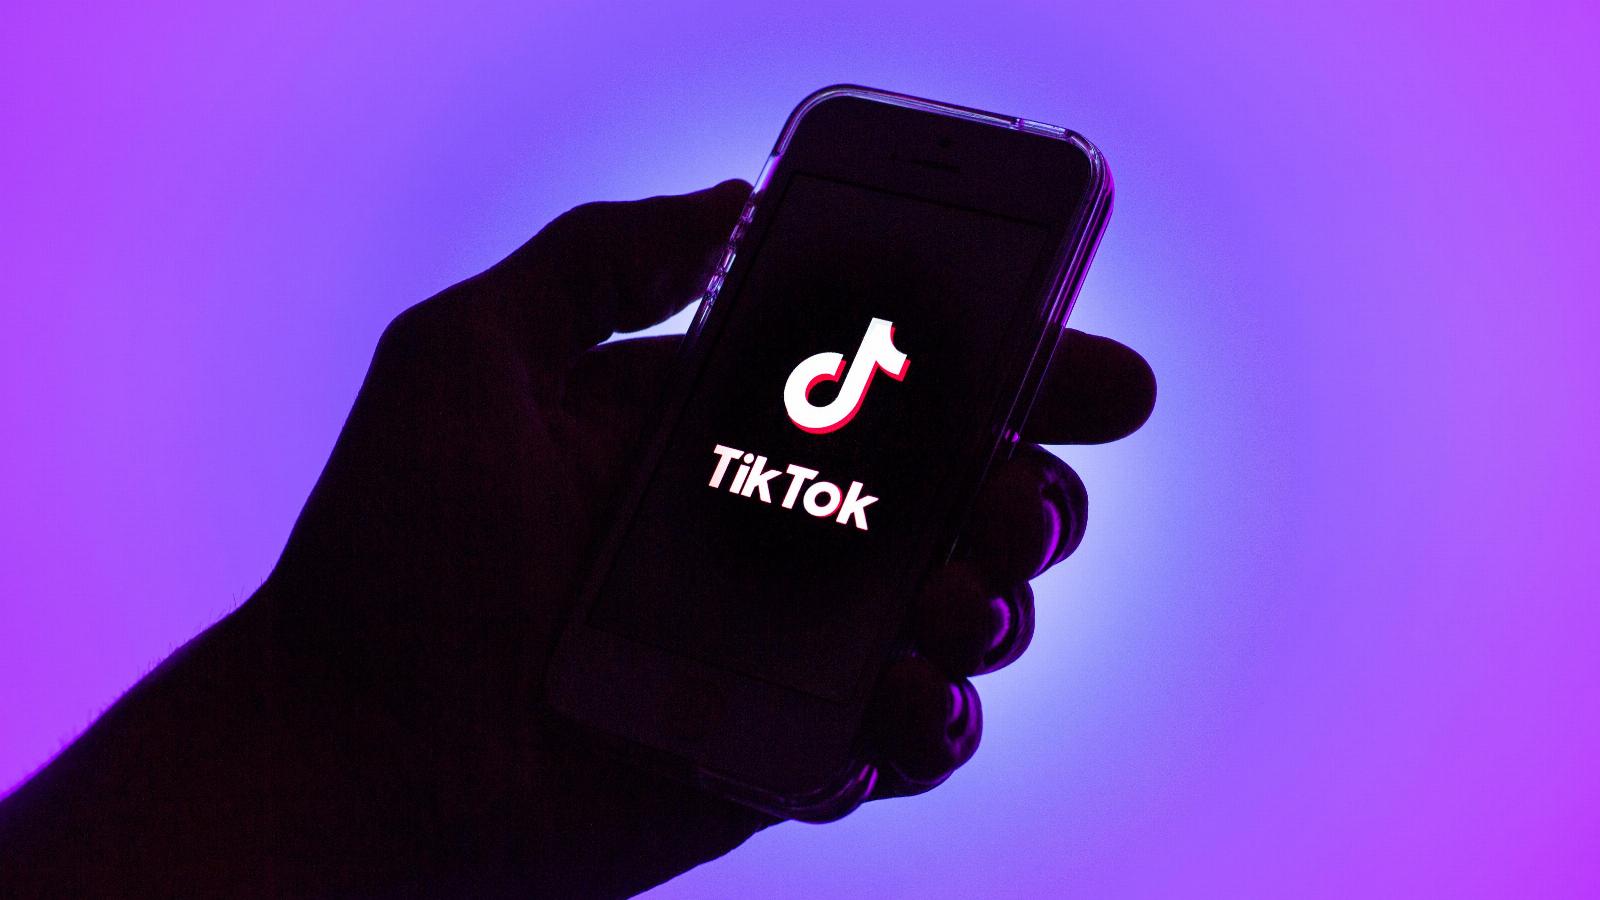 TikTok rolls out its ‘state-controlled media’ label to 40 more countries